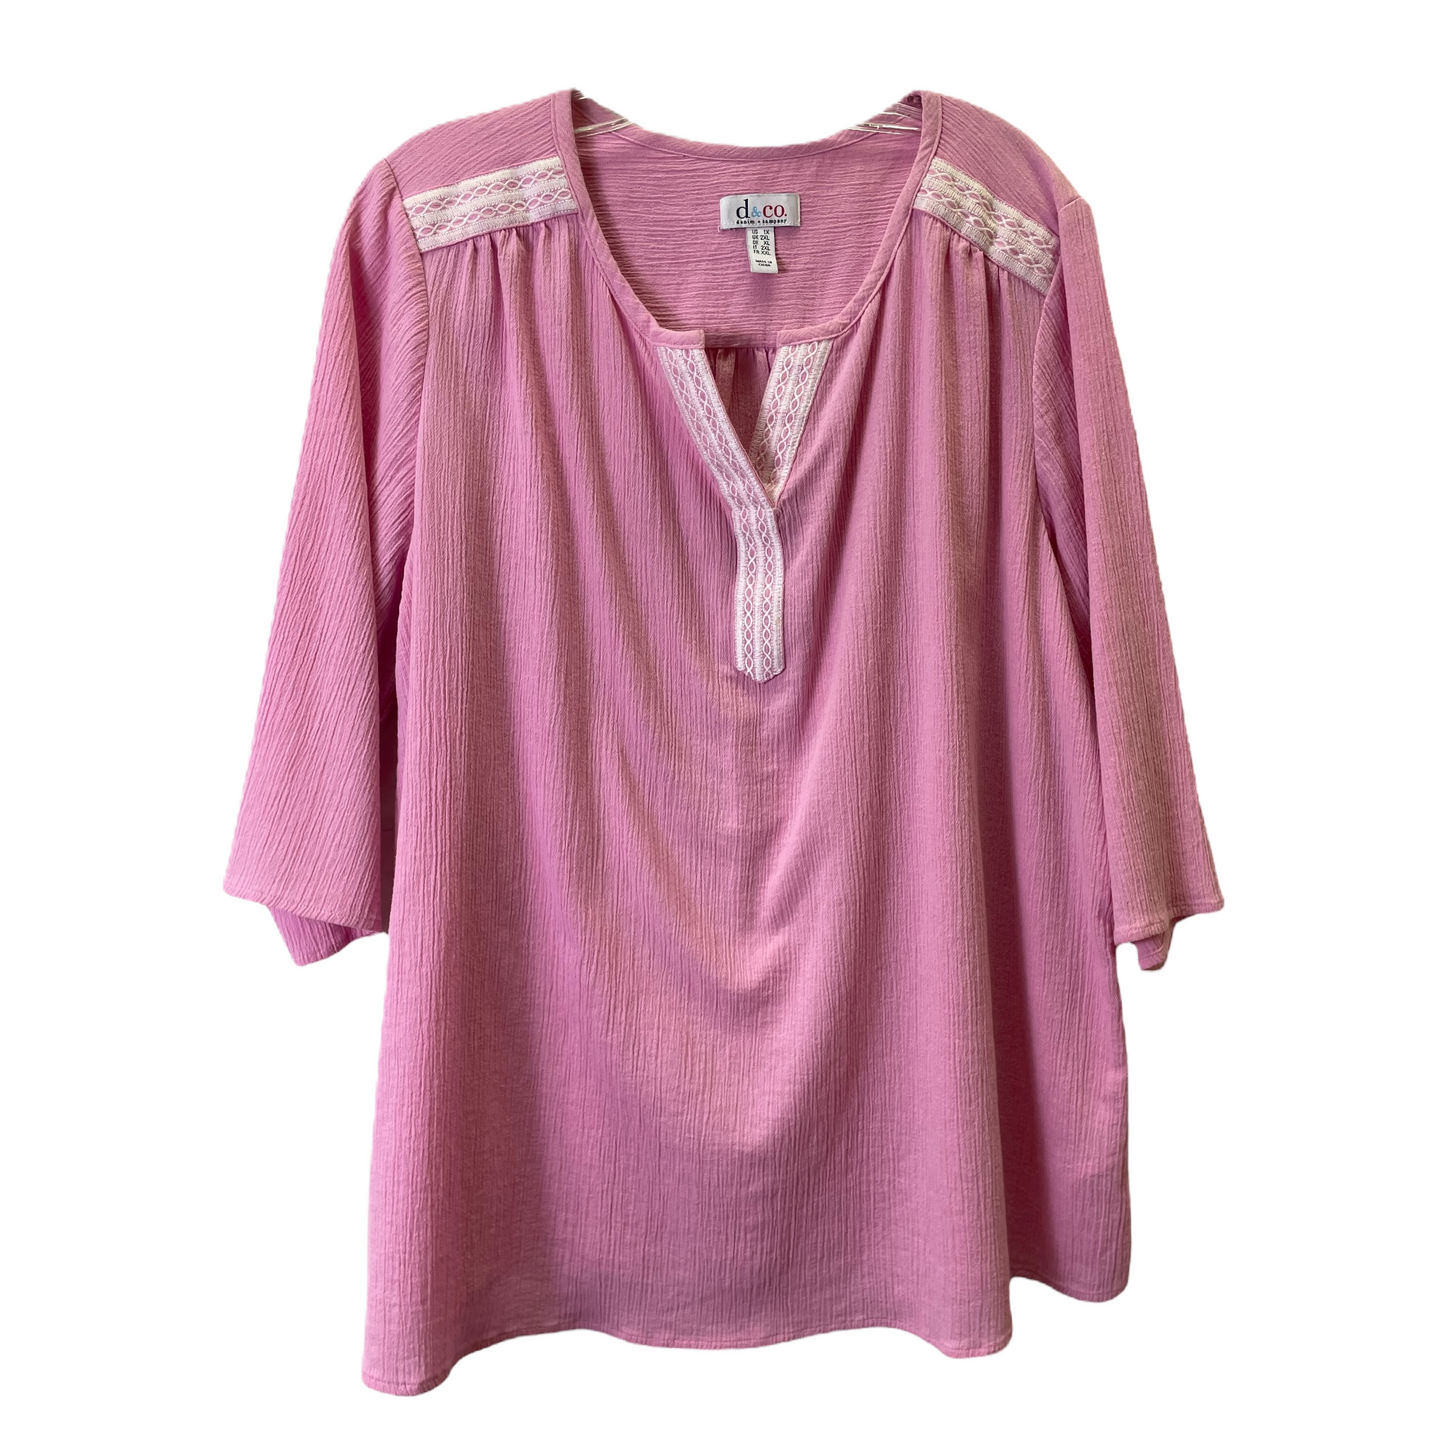 Pink Top 3/4 Sleeve By Denim And Company, Size: 1x